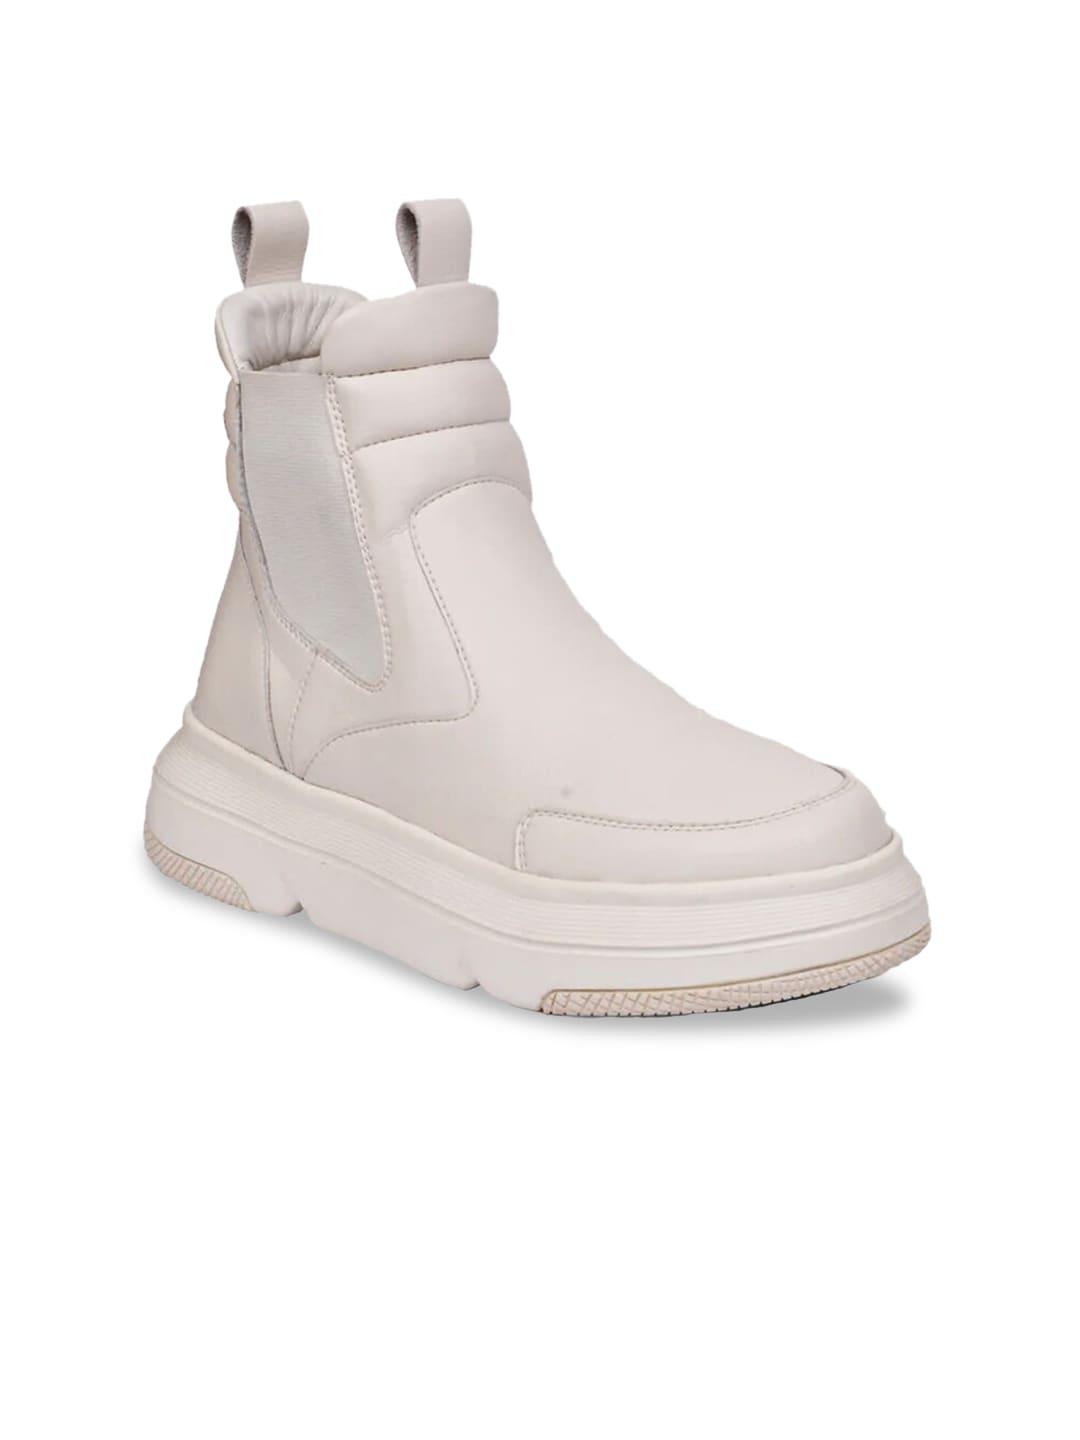 saint g women white solid leather winter boot